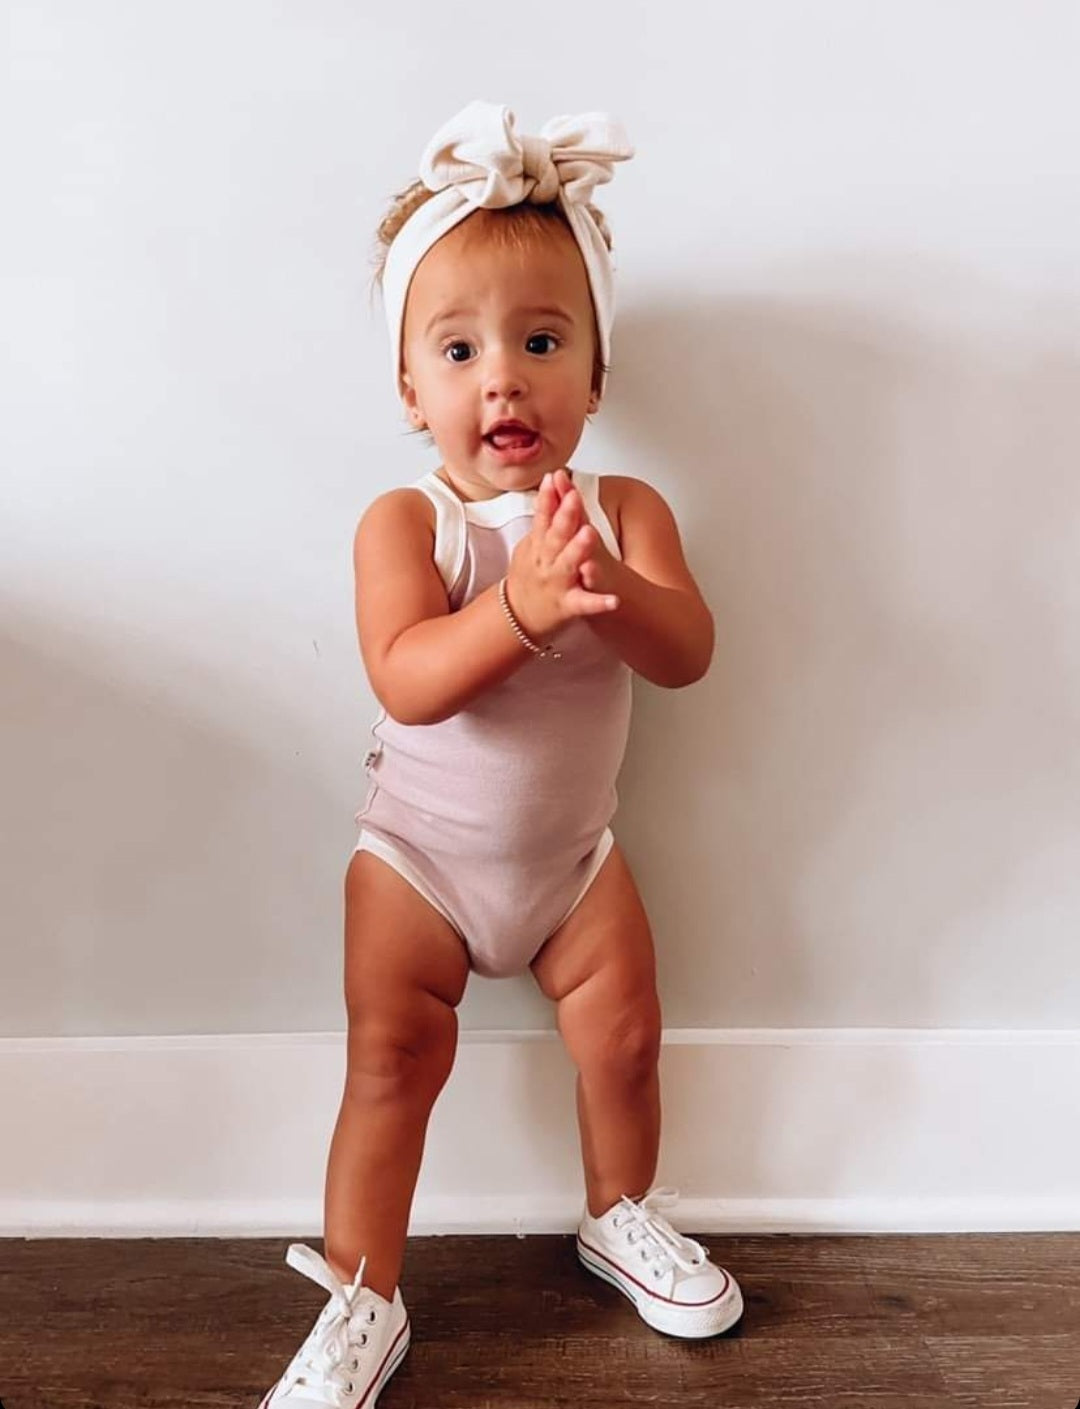 Candy Romper  |  Colored Onesie  |  6 colors